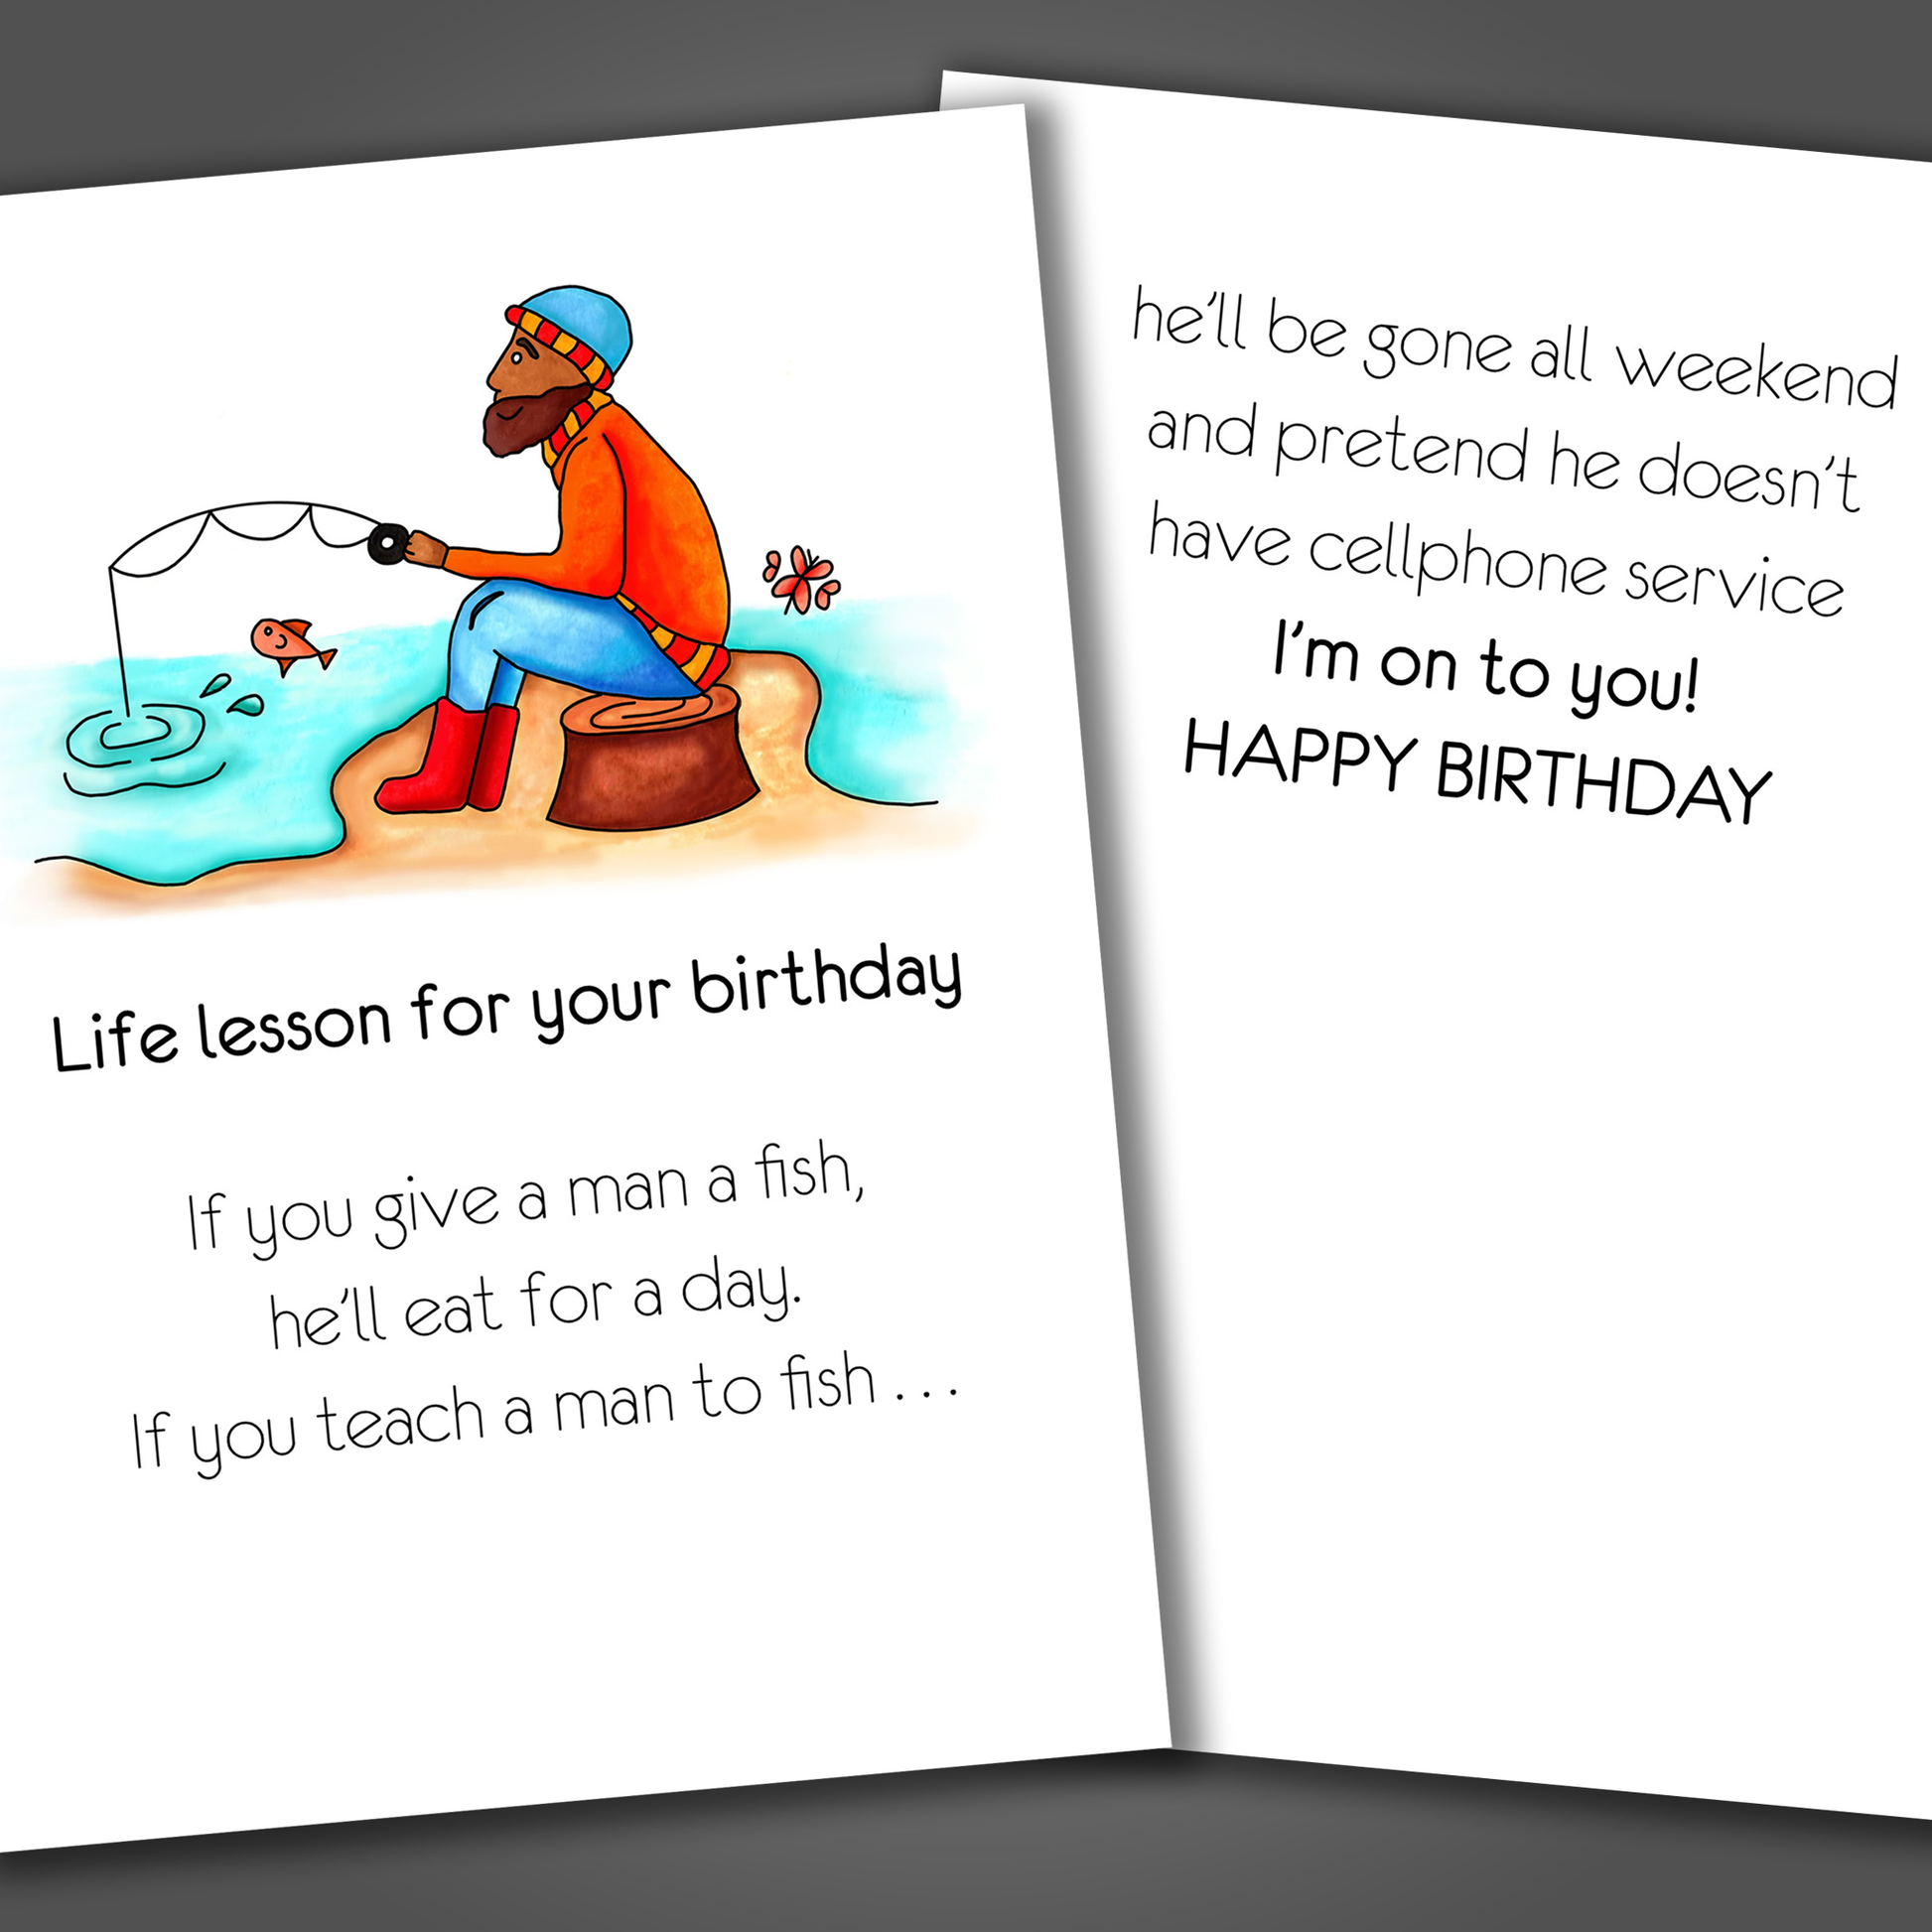 Funny happy birthday card with a man fishing on the front of the card and a funny joke inside of the card ending in happy birthday